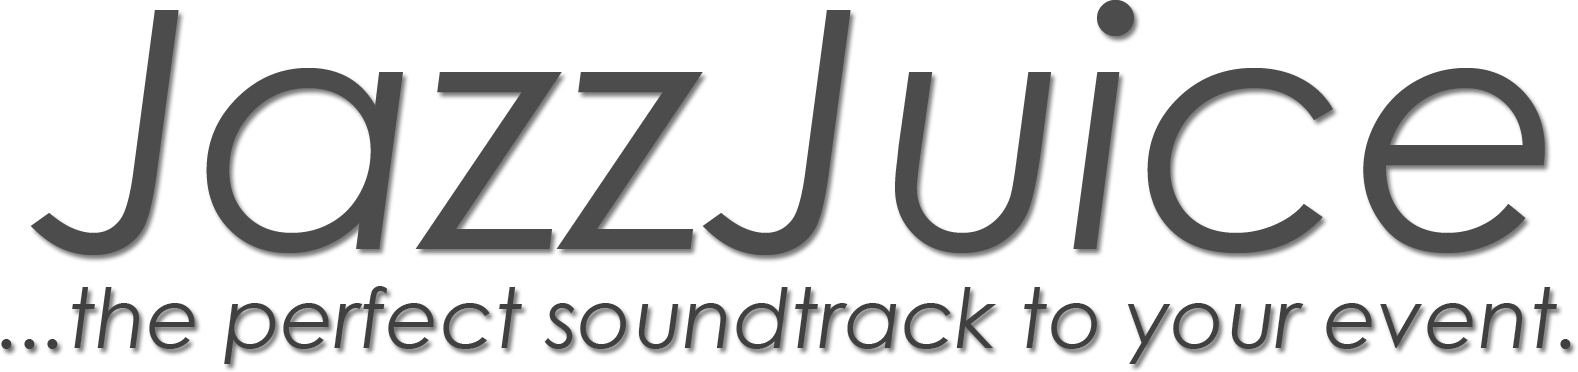 Jazz Juice - the perfect soundtrack to your wedding, party, or corporate event in Bucks, Beds, Herts and London